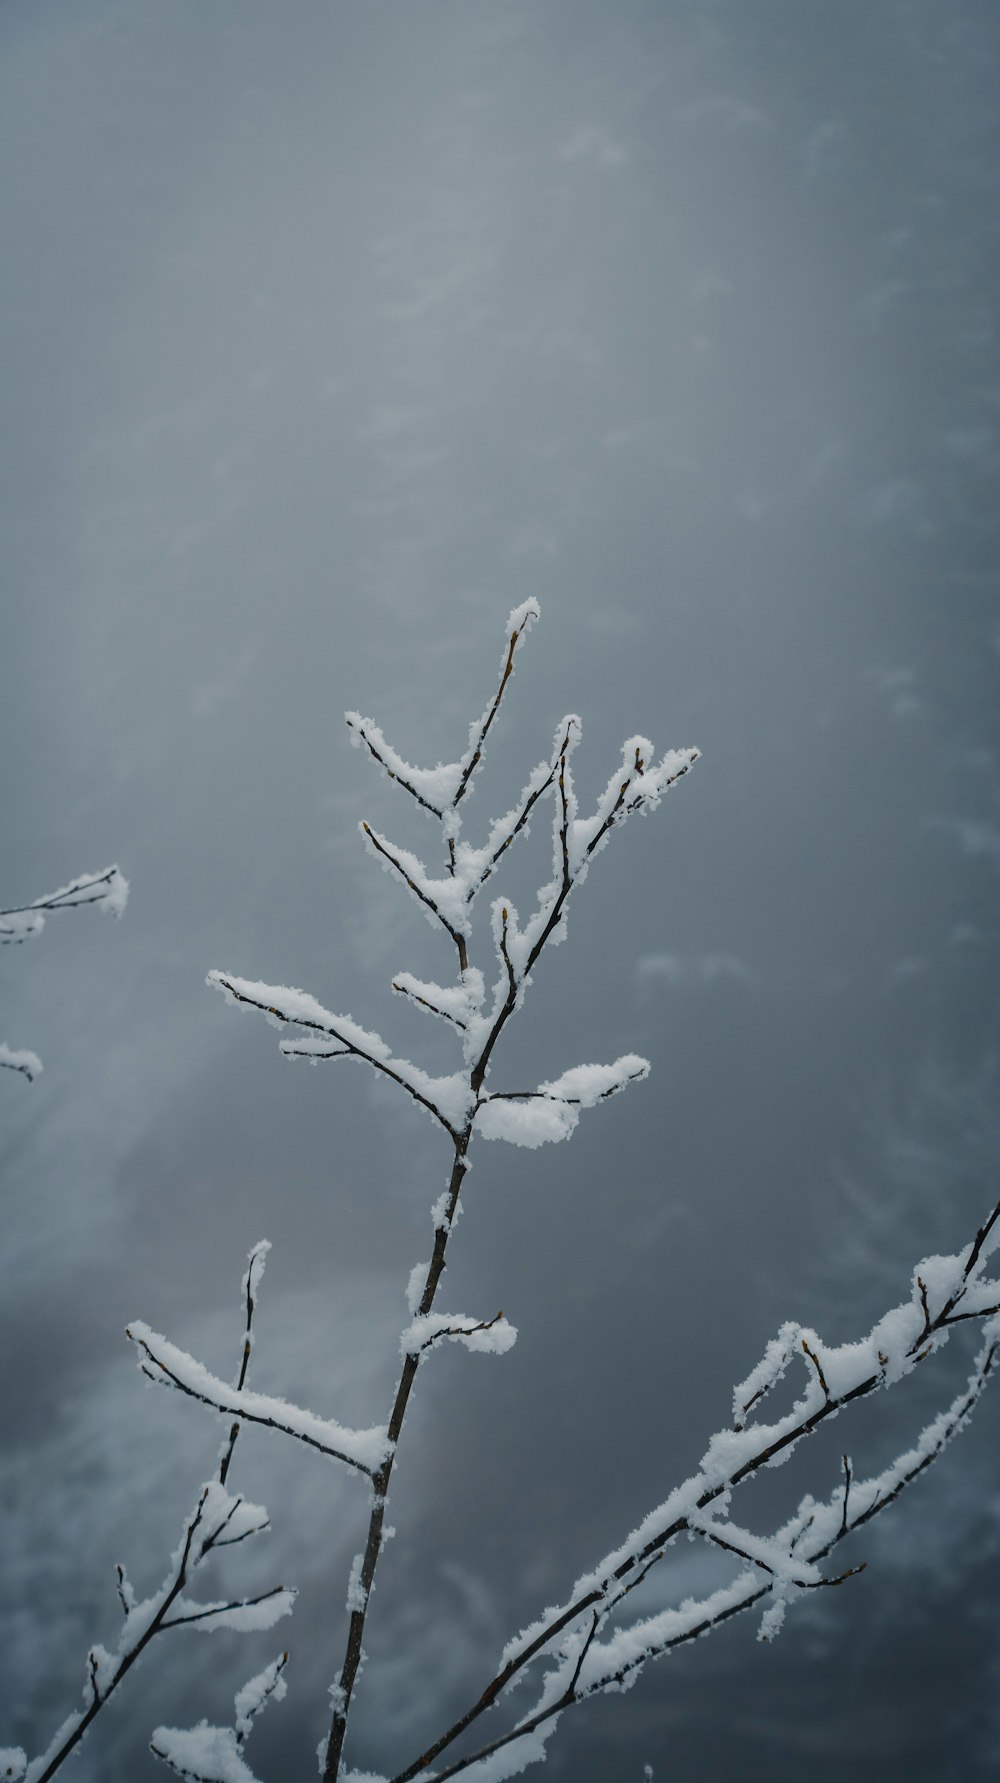 a tree branch covered in snow against a cloudy sky